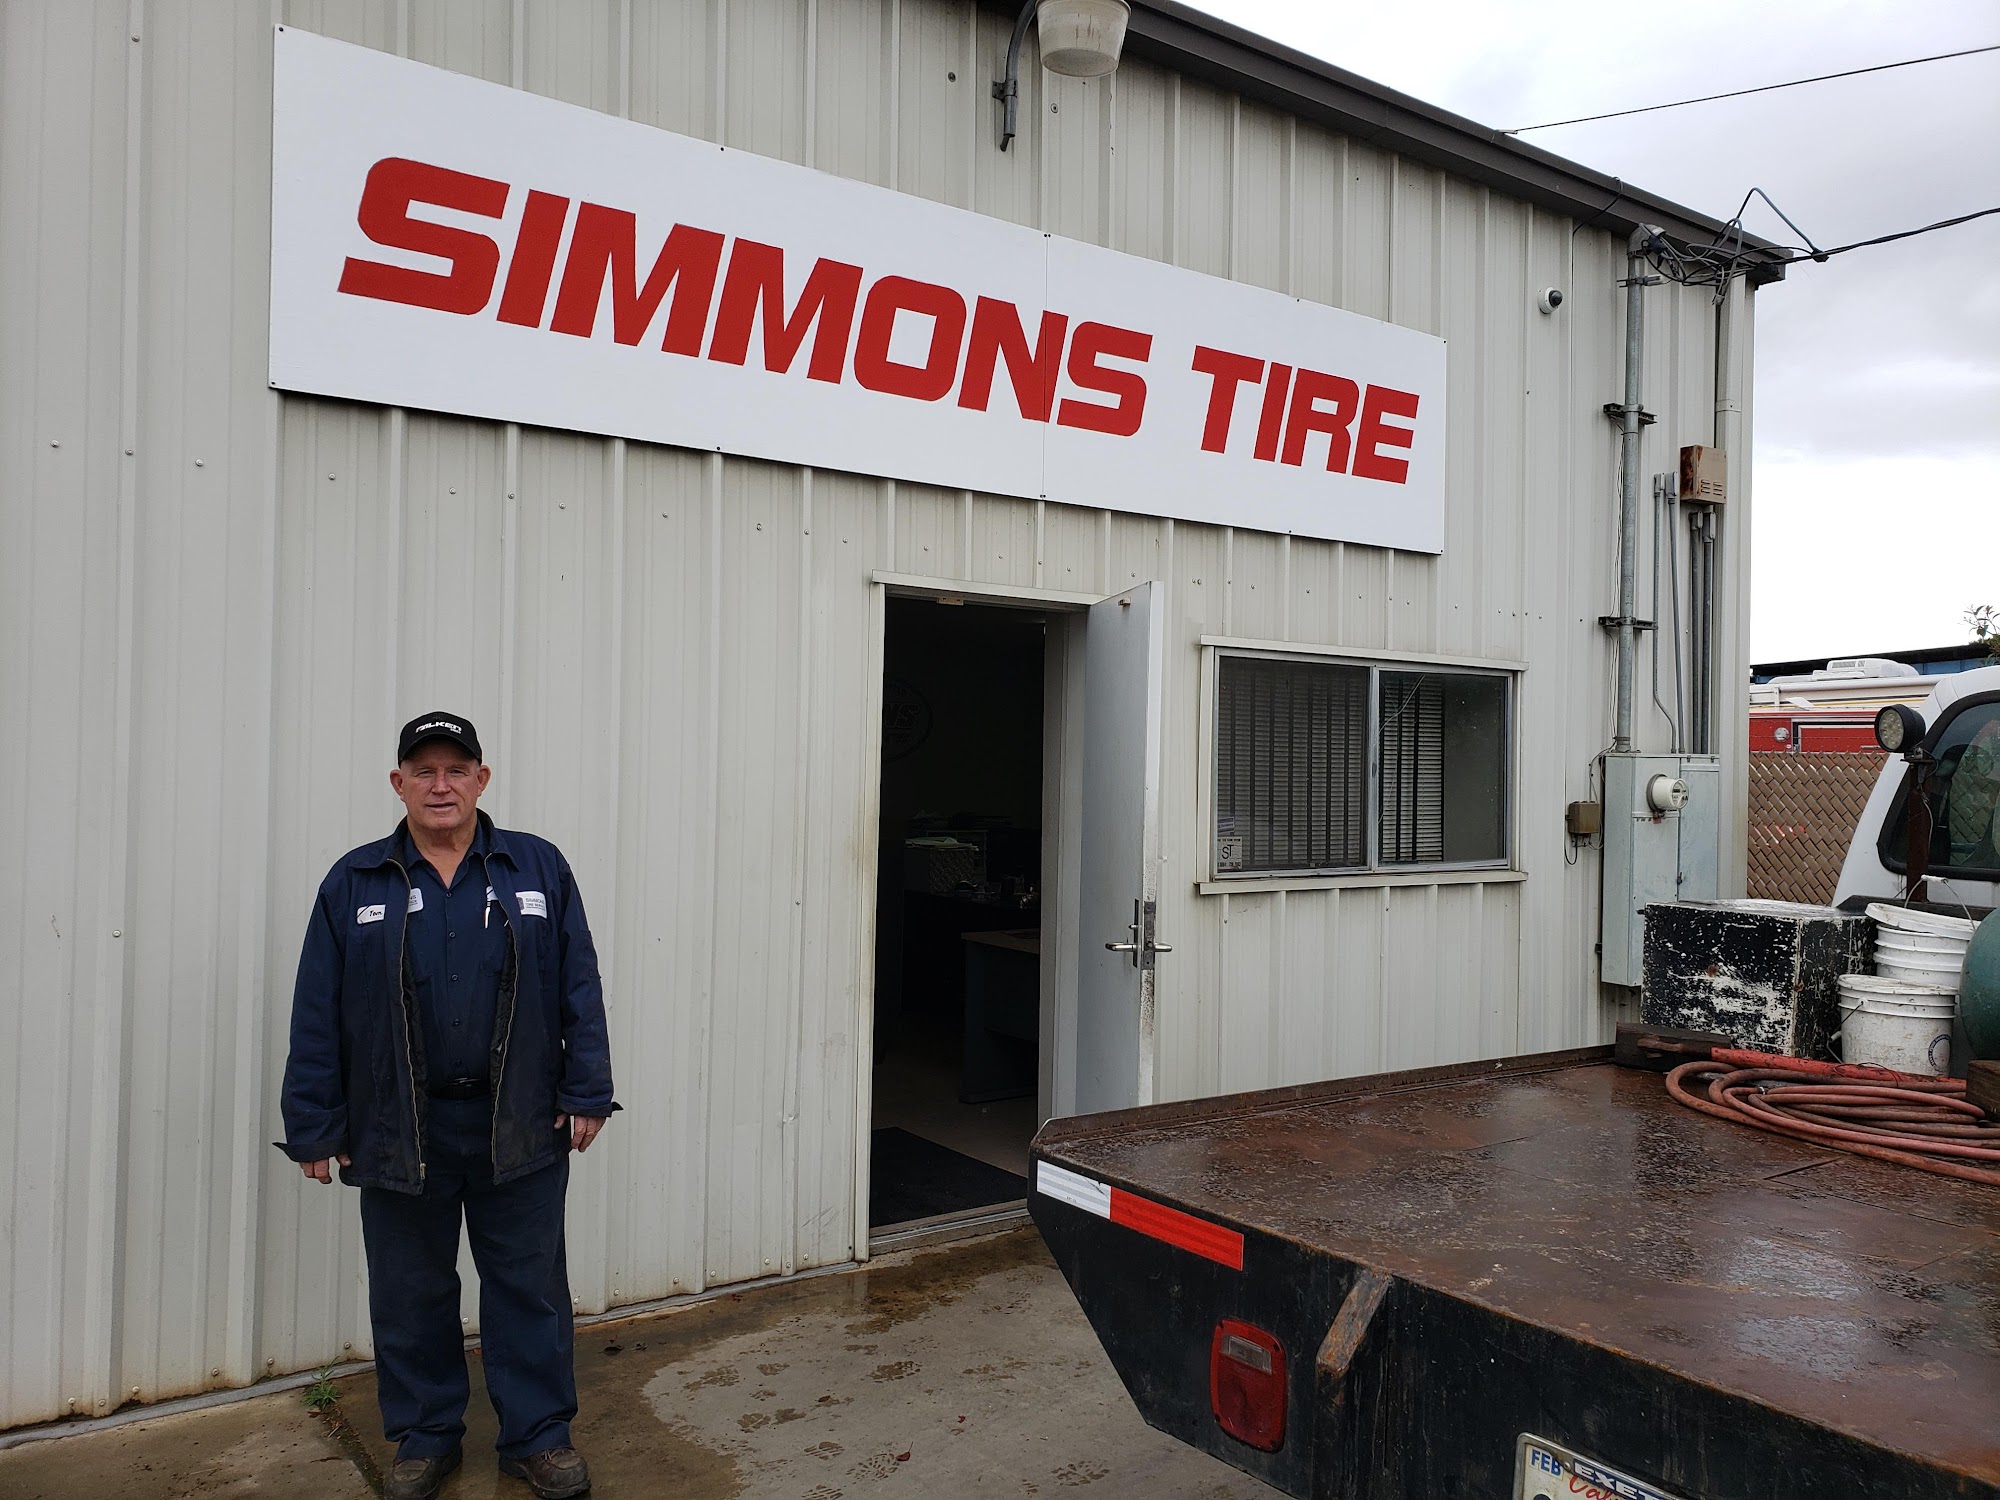 Bill Simmons Tire Services